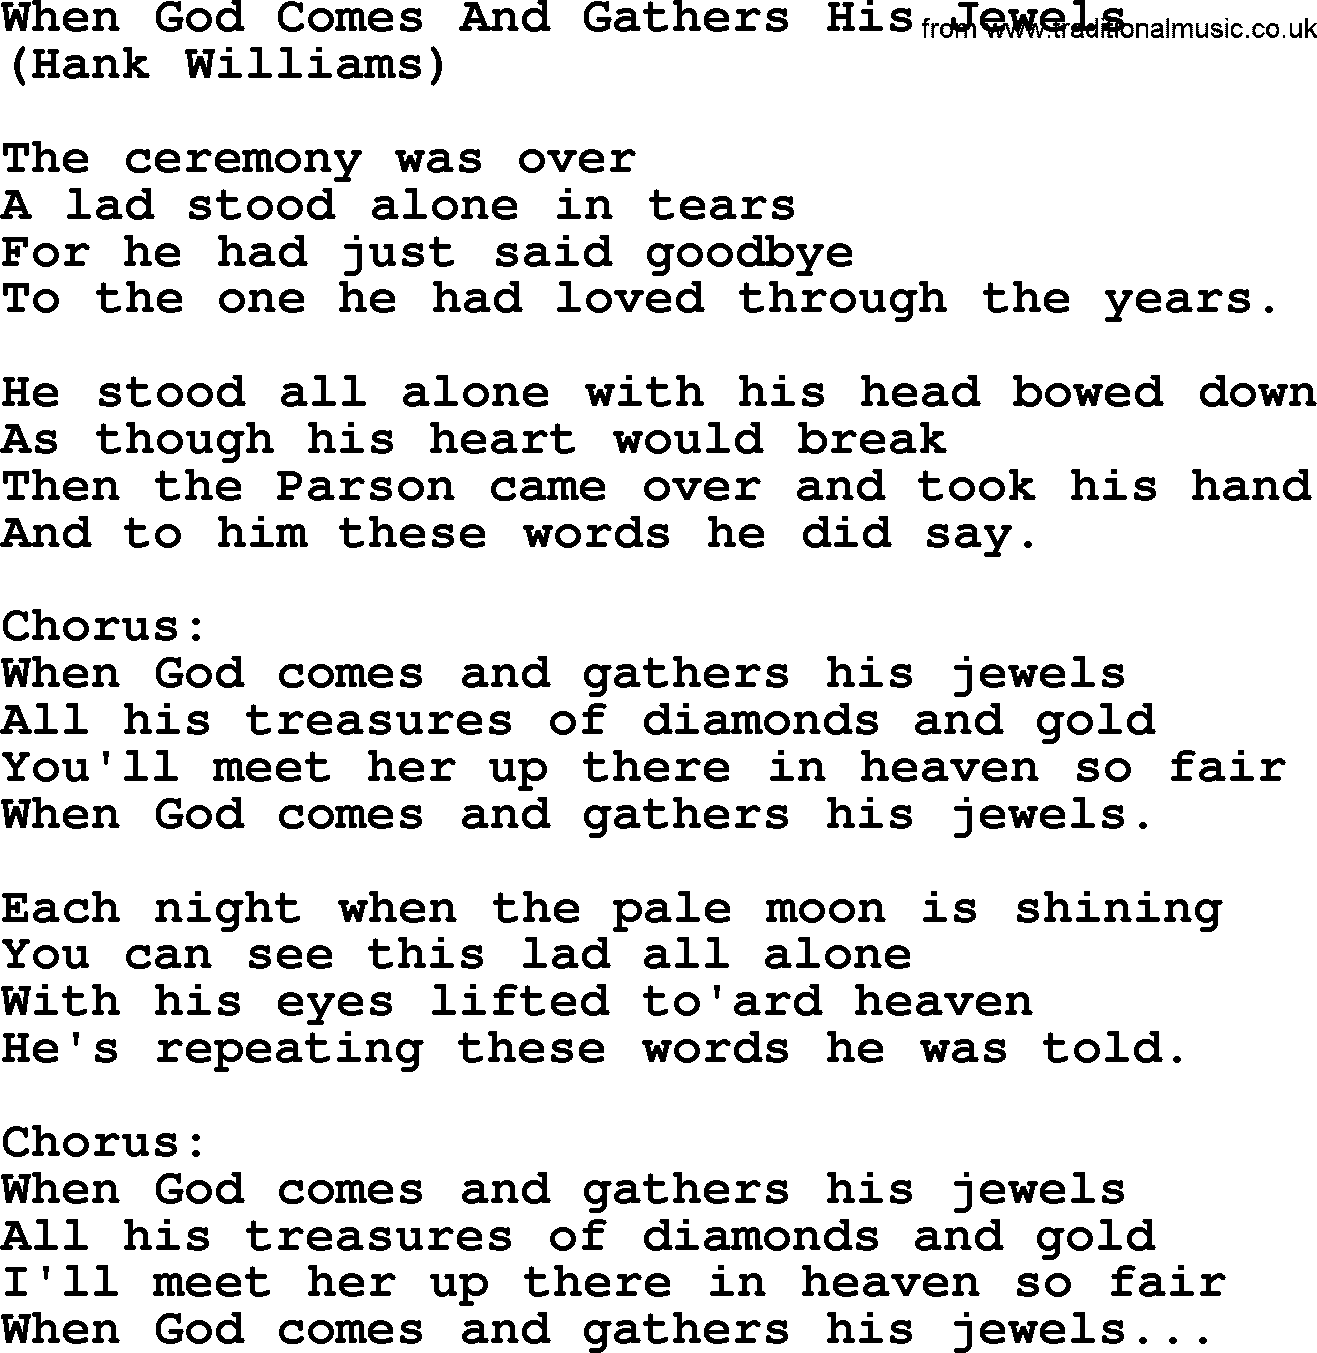 Hank Williams song When God Comes And Gathers His Jewels, lyrics